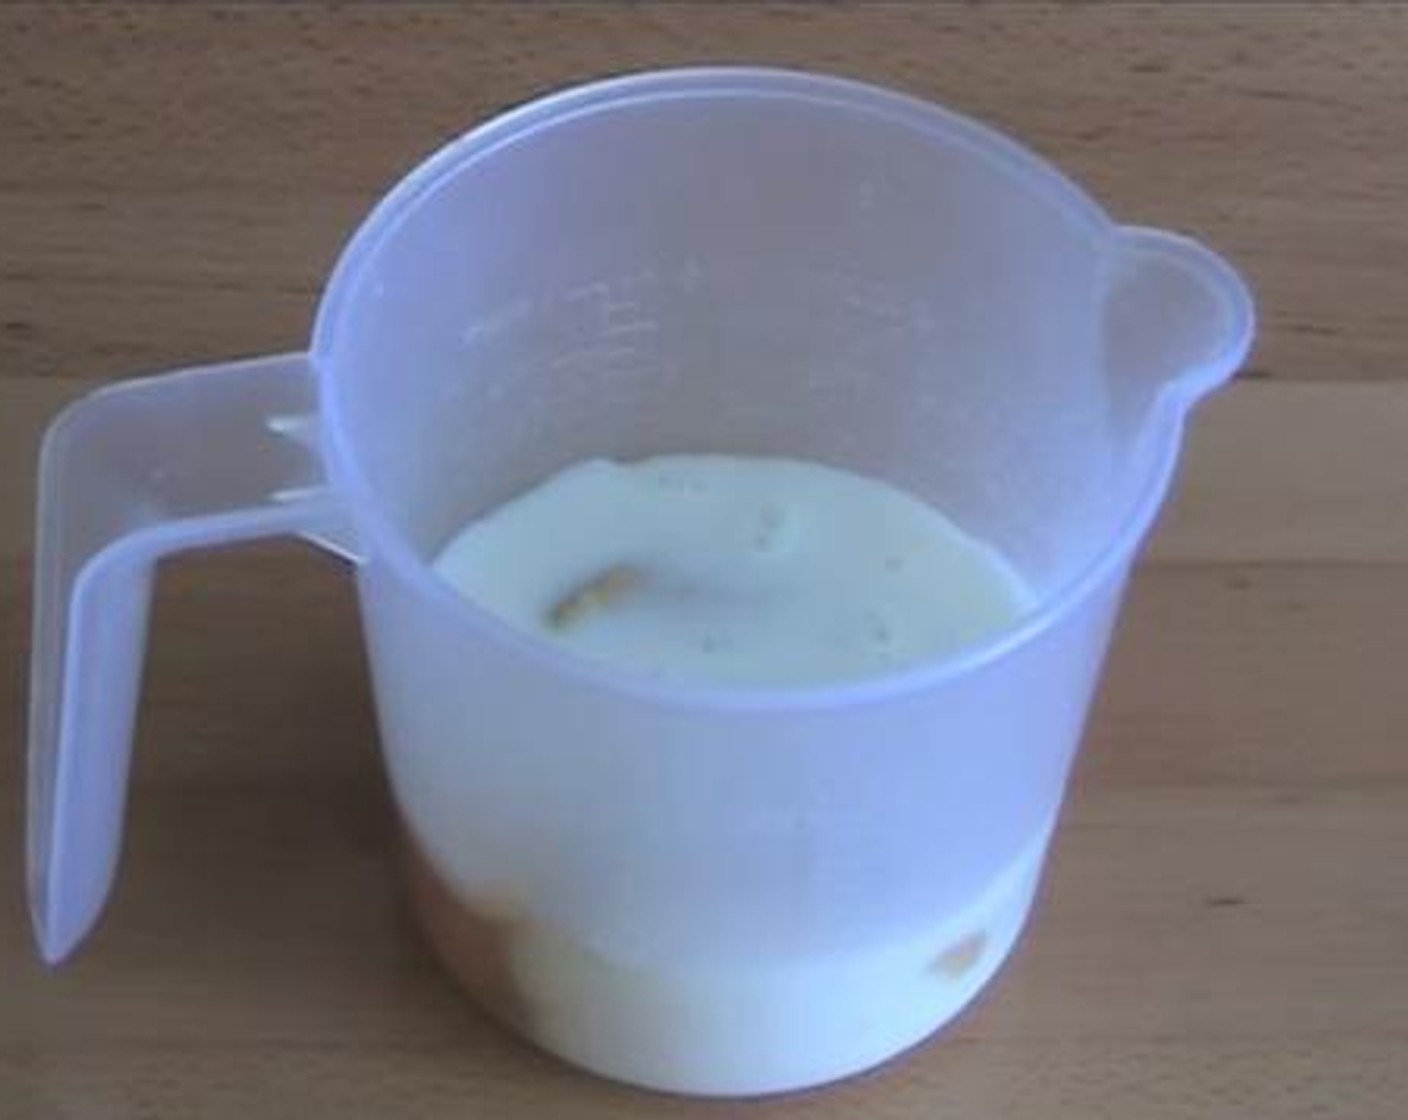 step 2 In a mixing jug, mix the Egg (1), Yellow Mustard (1/2 Tbsp), and Milk (1/2 cup).